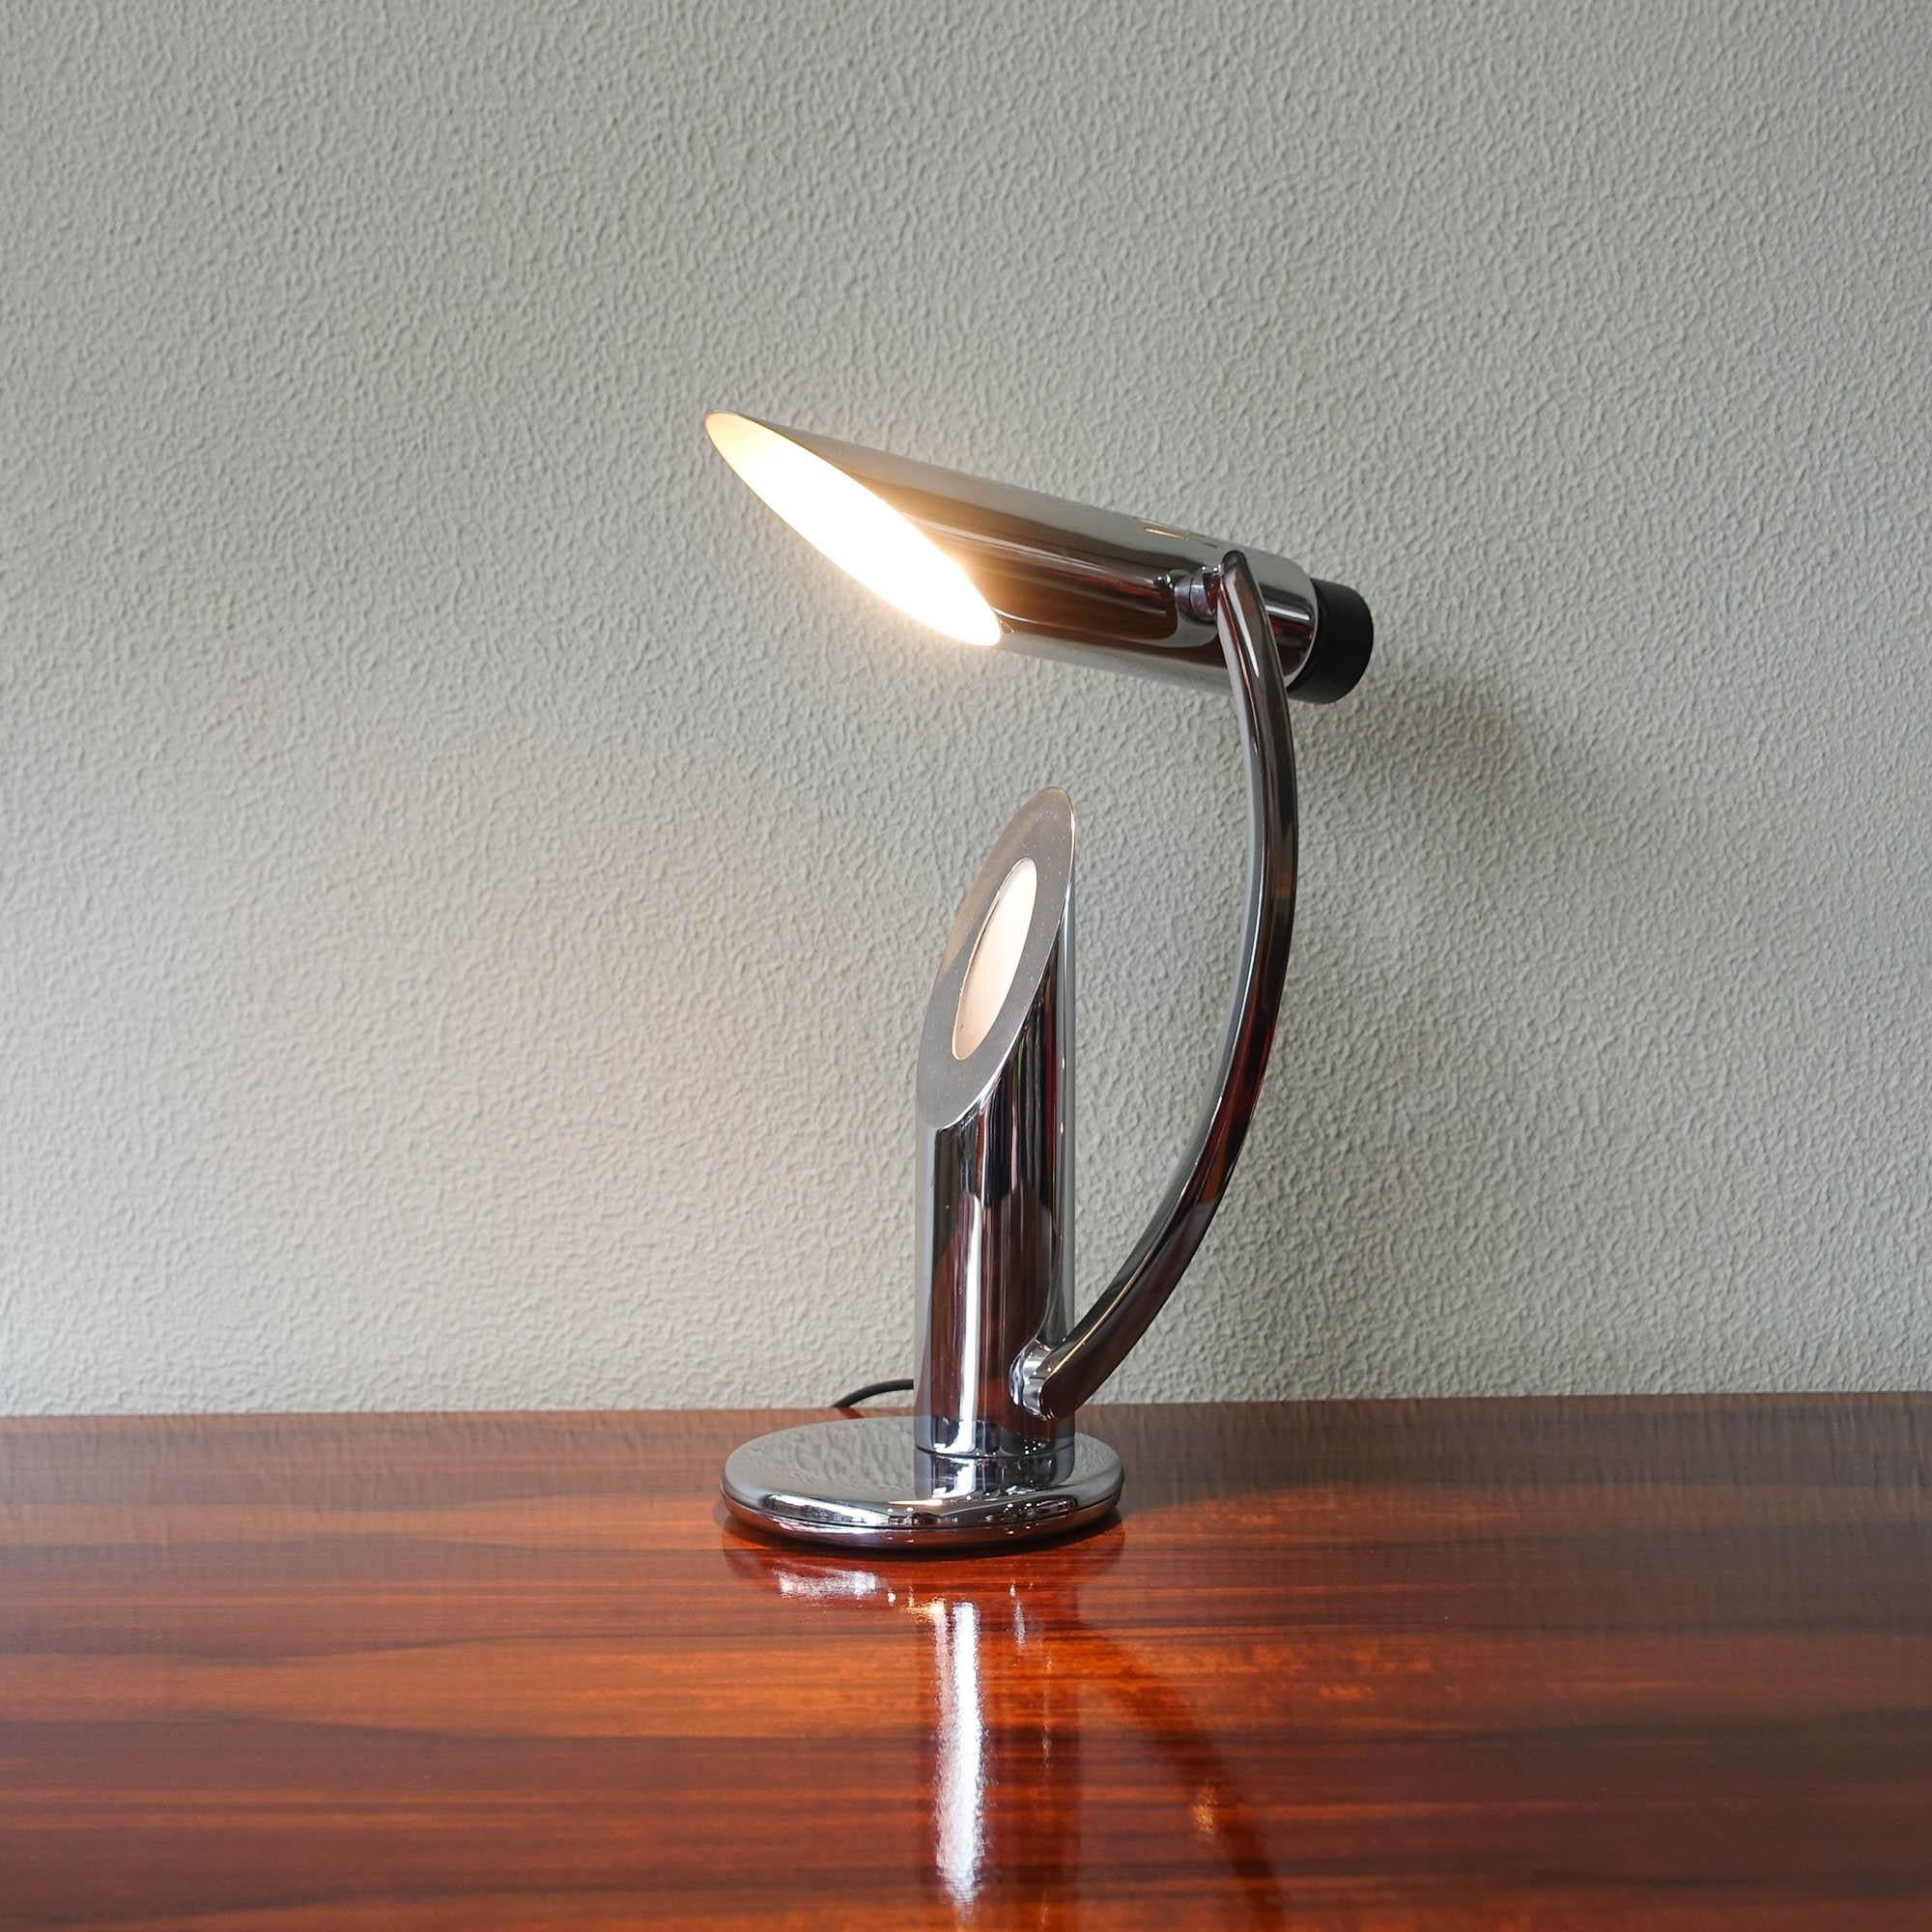 Late 20th Century Tharsis Foldable Chrome Table Lamp from Fase by Luis Perez de la Oliva, 1973